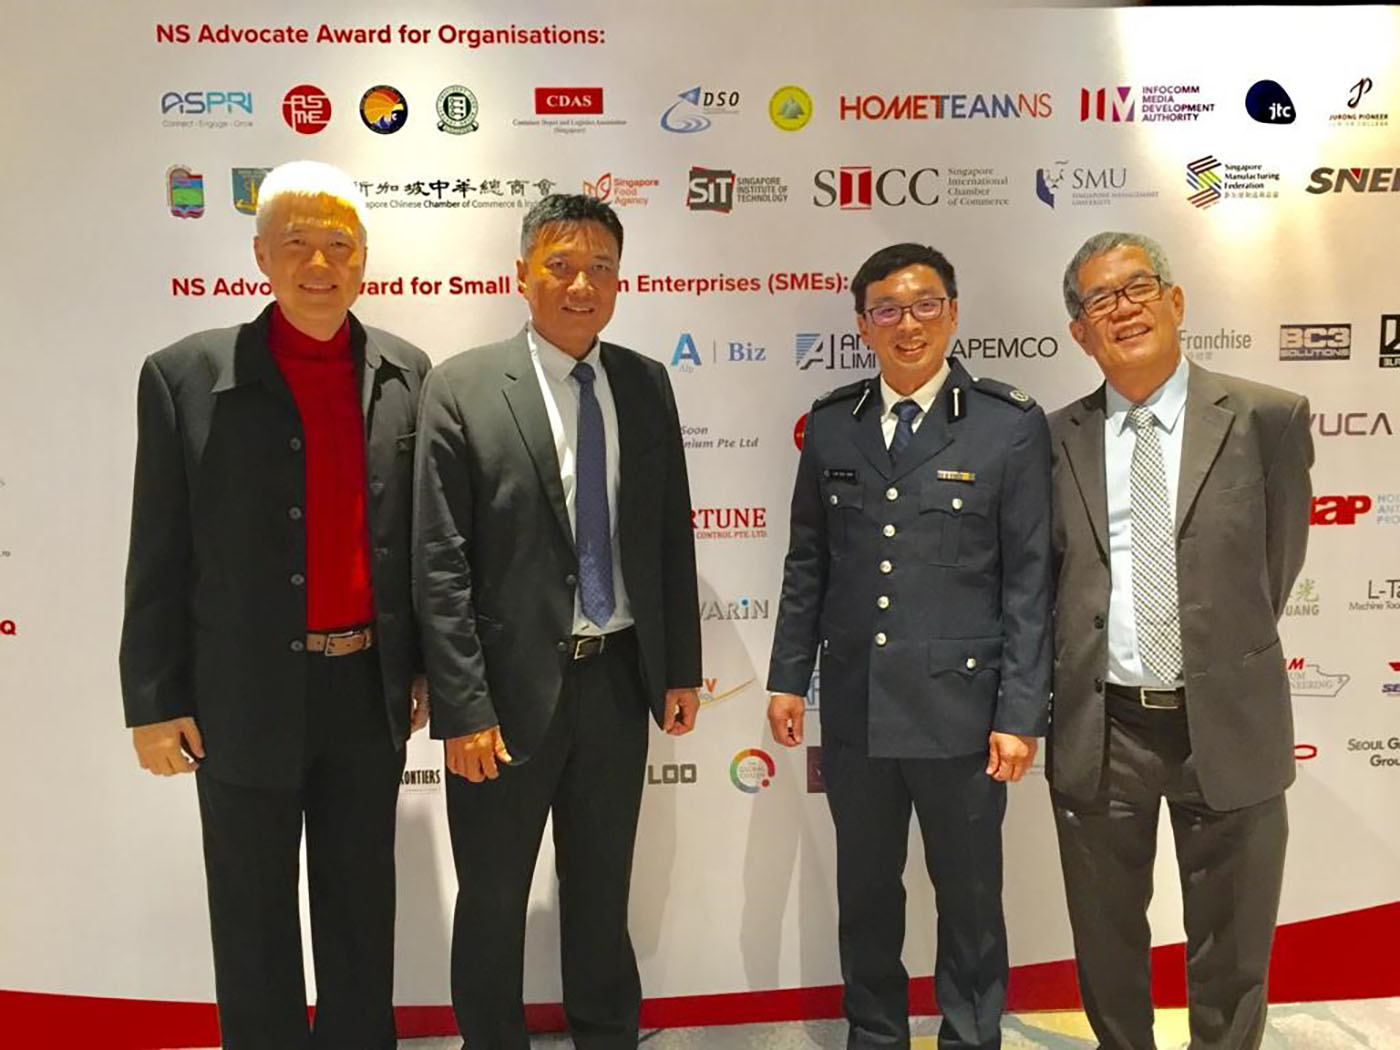 DAC (NS) Lim Kok Hwa (second from right) at the Total Defence Awards Dinner 2019, where SIT received the NS Advocate Award for Organisations.